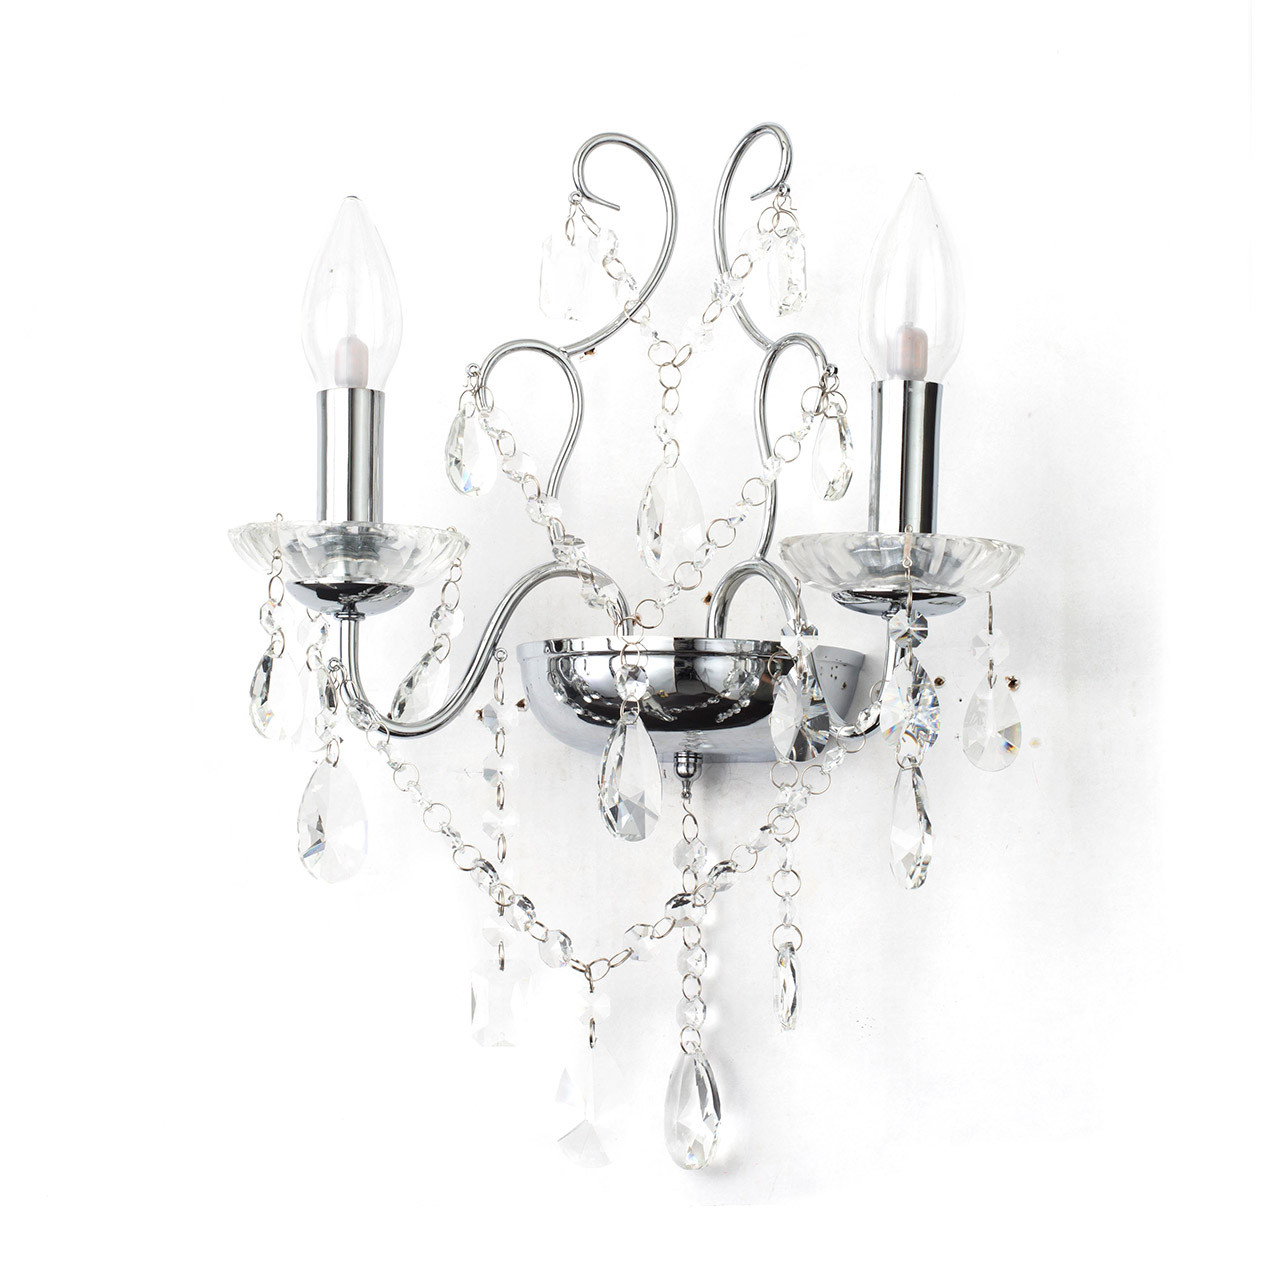 Photos - Chandelier / Lamp Spa Pro Annalee 2-Light Wall Light Crystal Glass and Chrome SP-25253-CHR